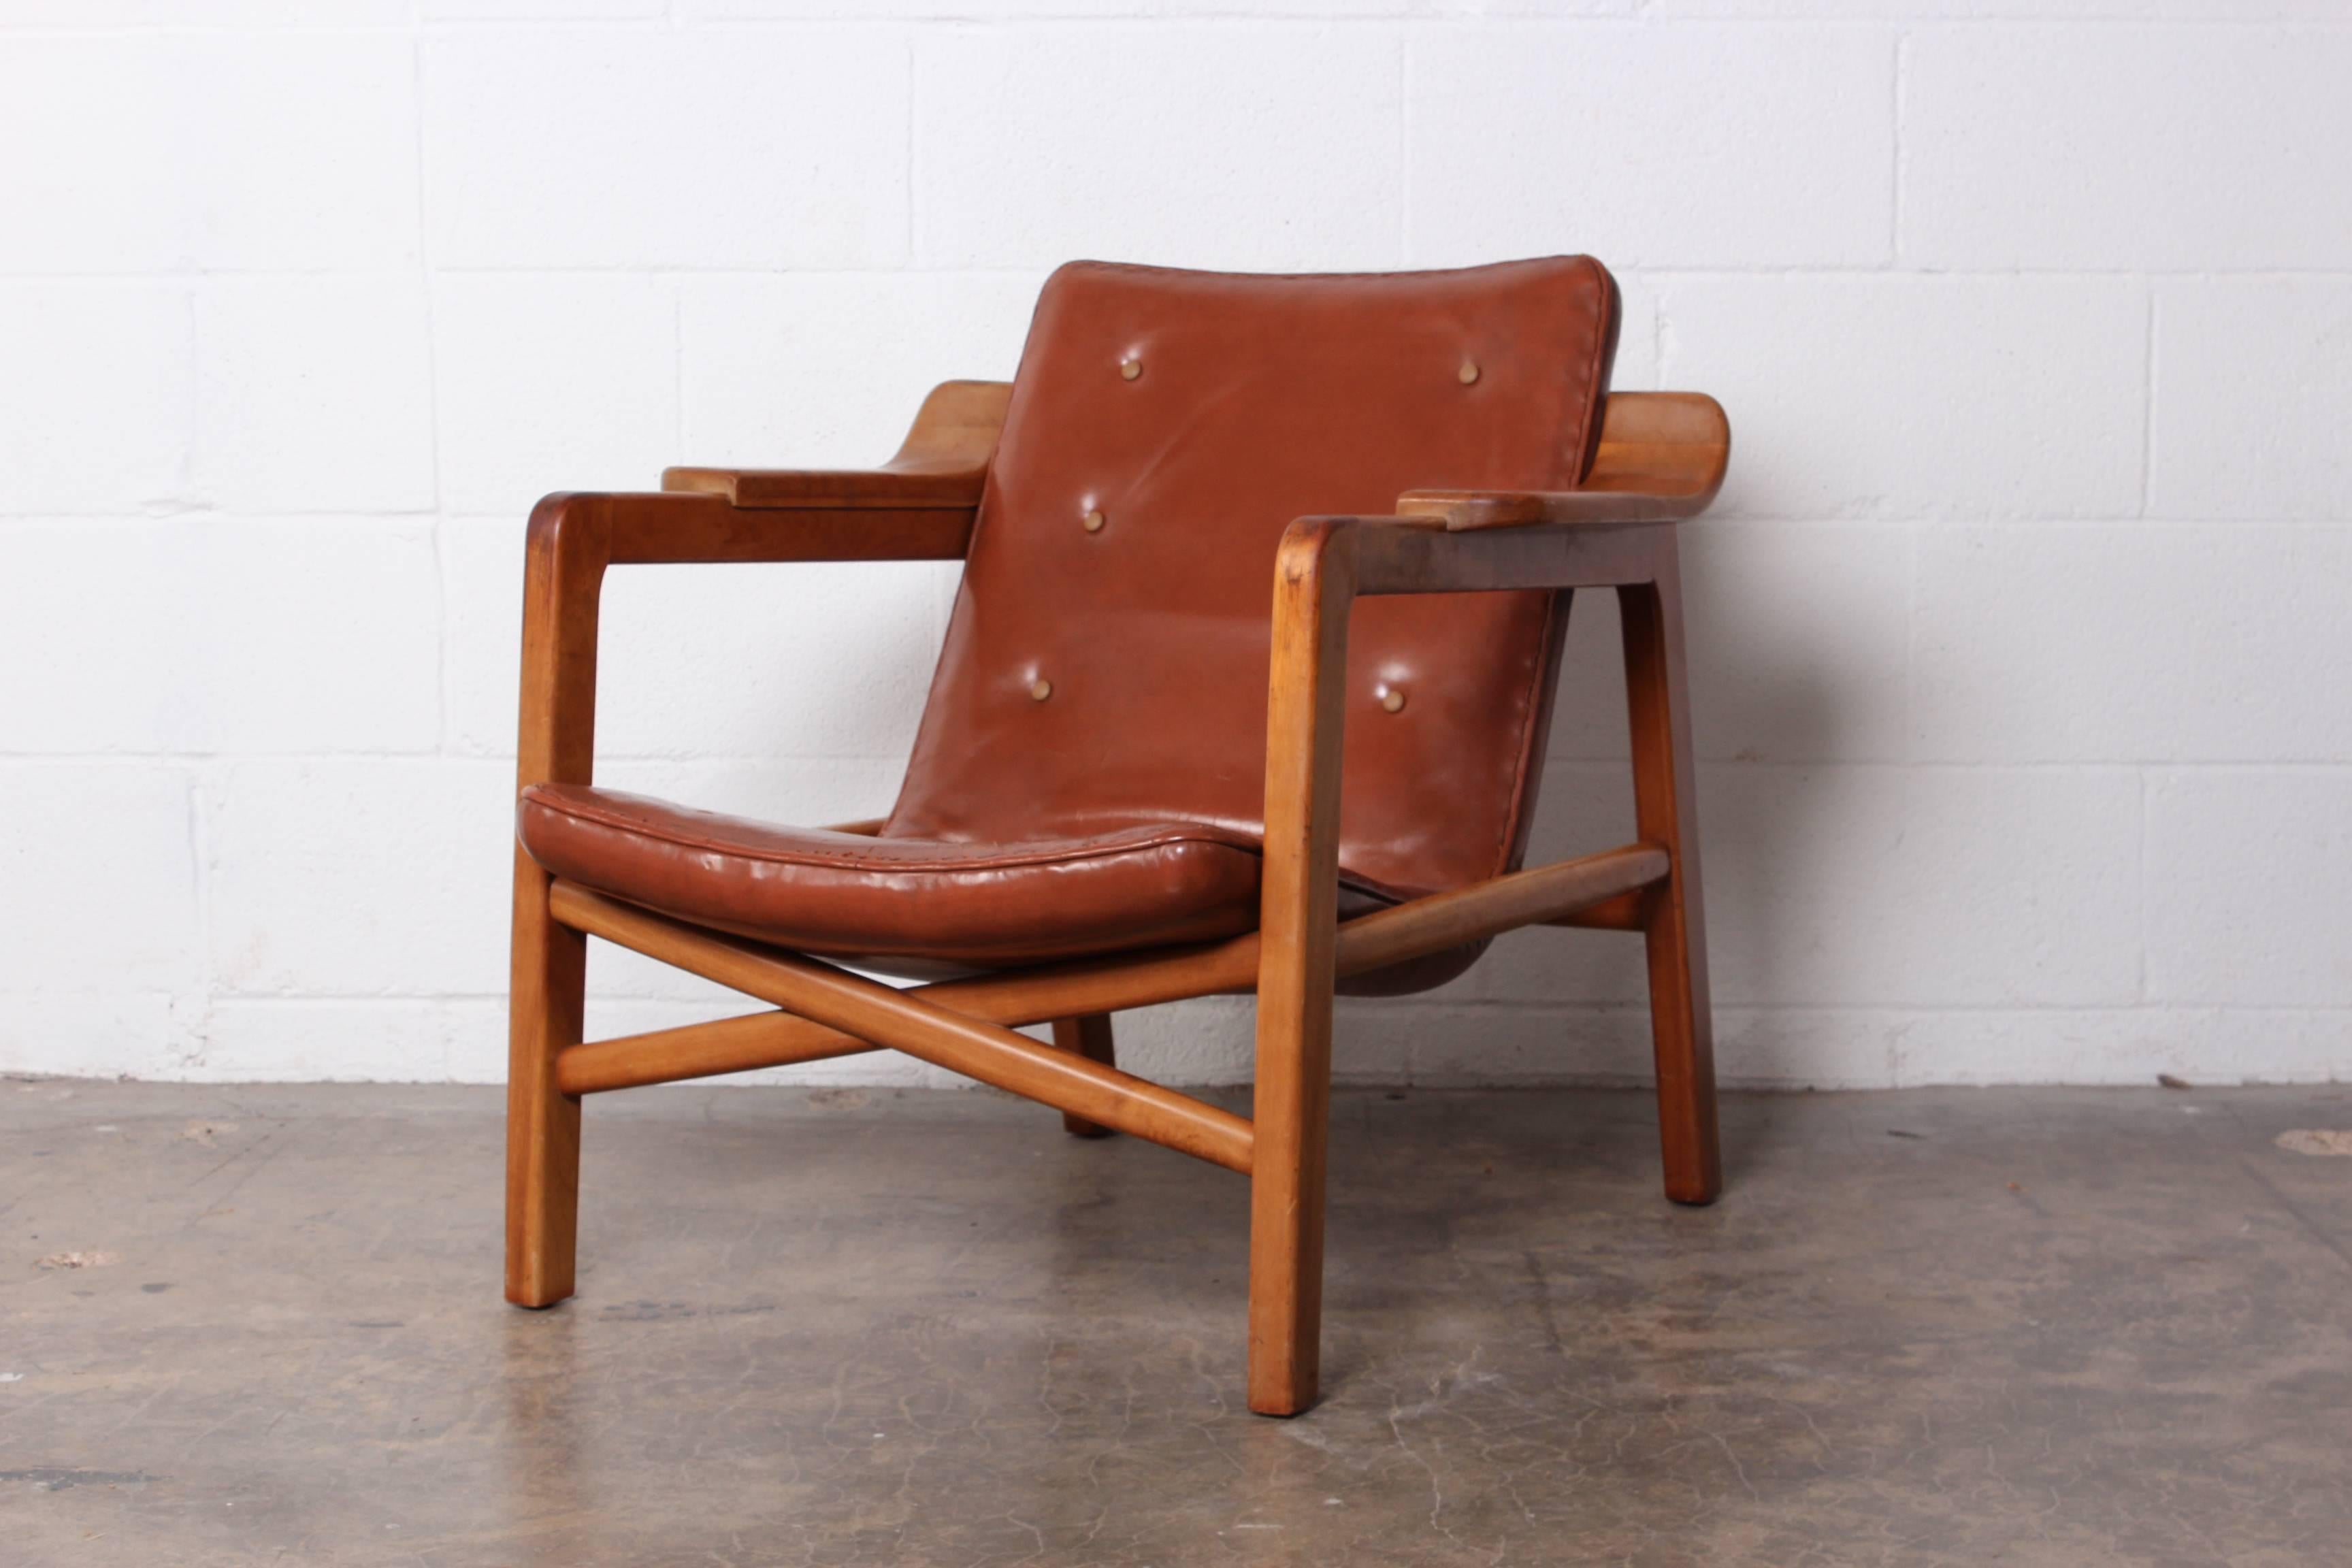 Tove & Edvard Kindt-Larsen 'Fireplace' Lounge Chair in Original Leather 2